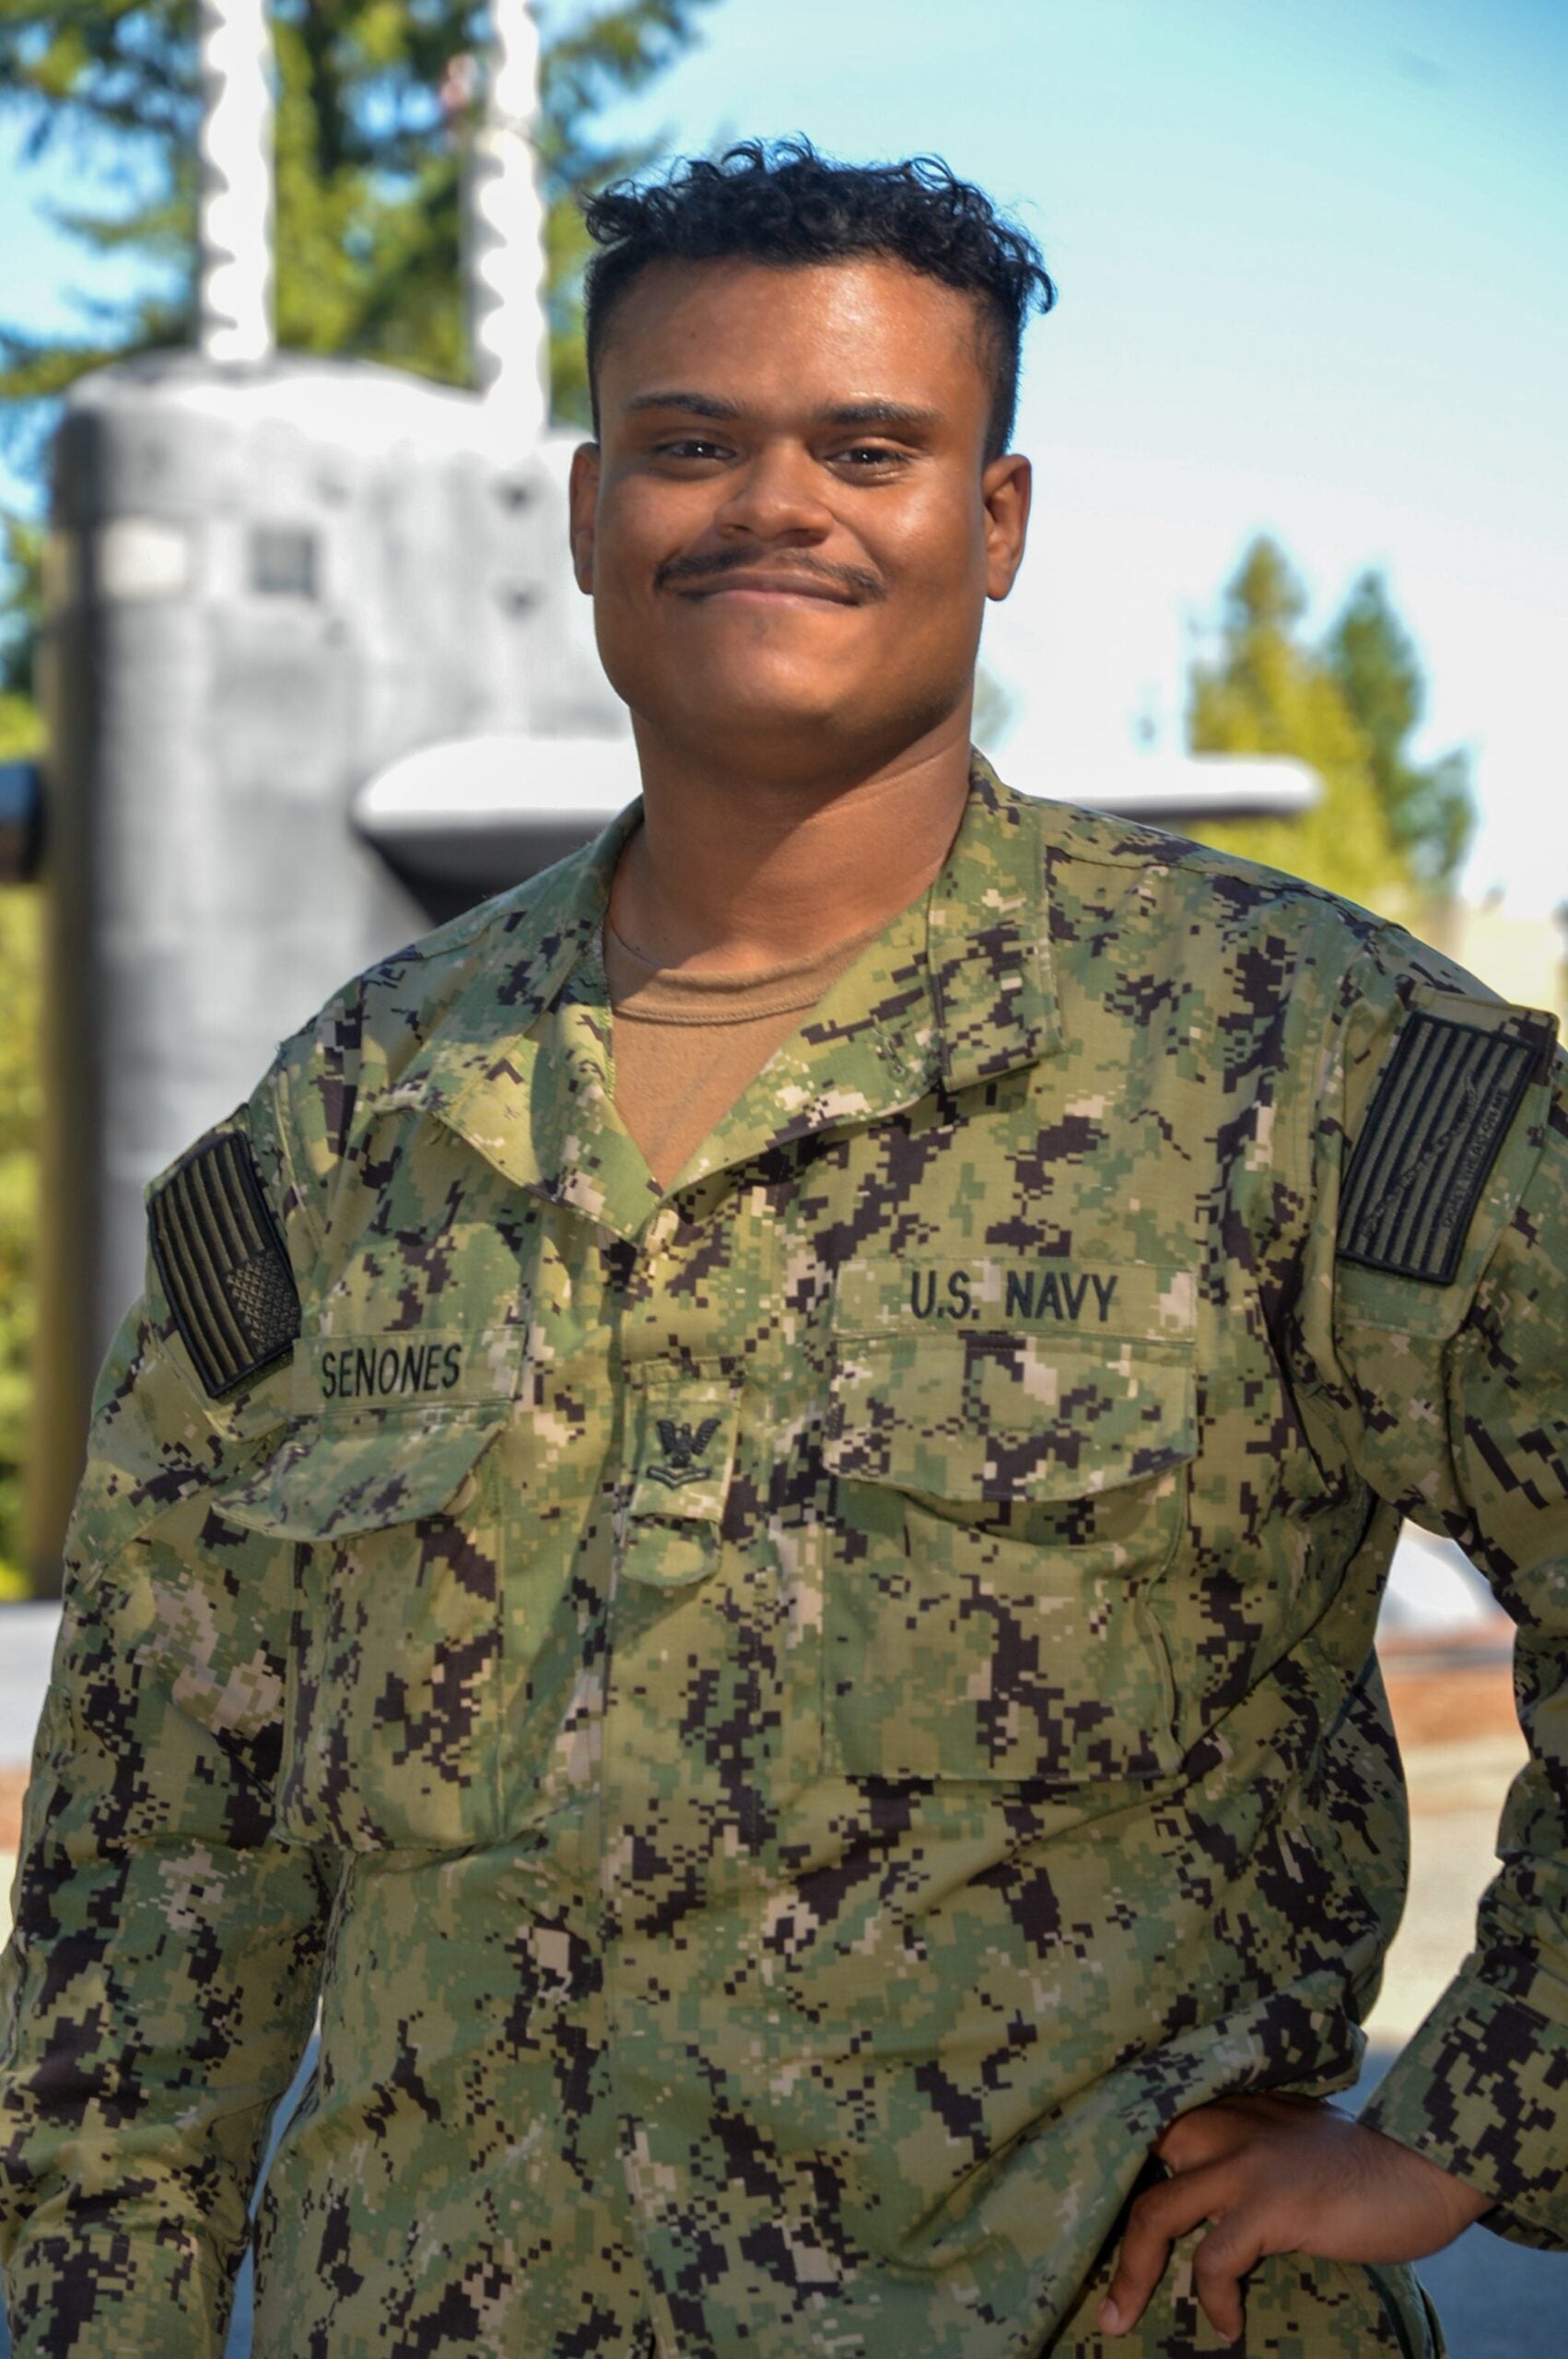 Petty Officer 2nd Class Jalen Senones serves as a machinist's mate and joined the Navy for the opportunities it provides.